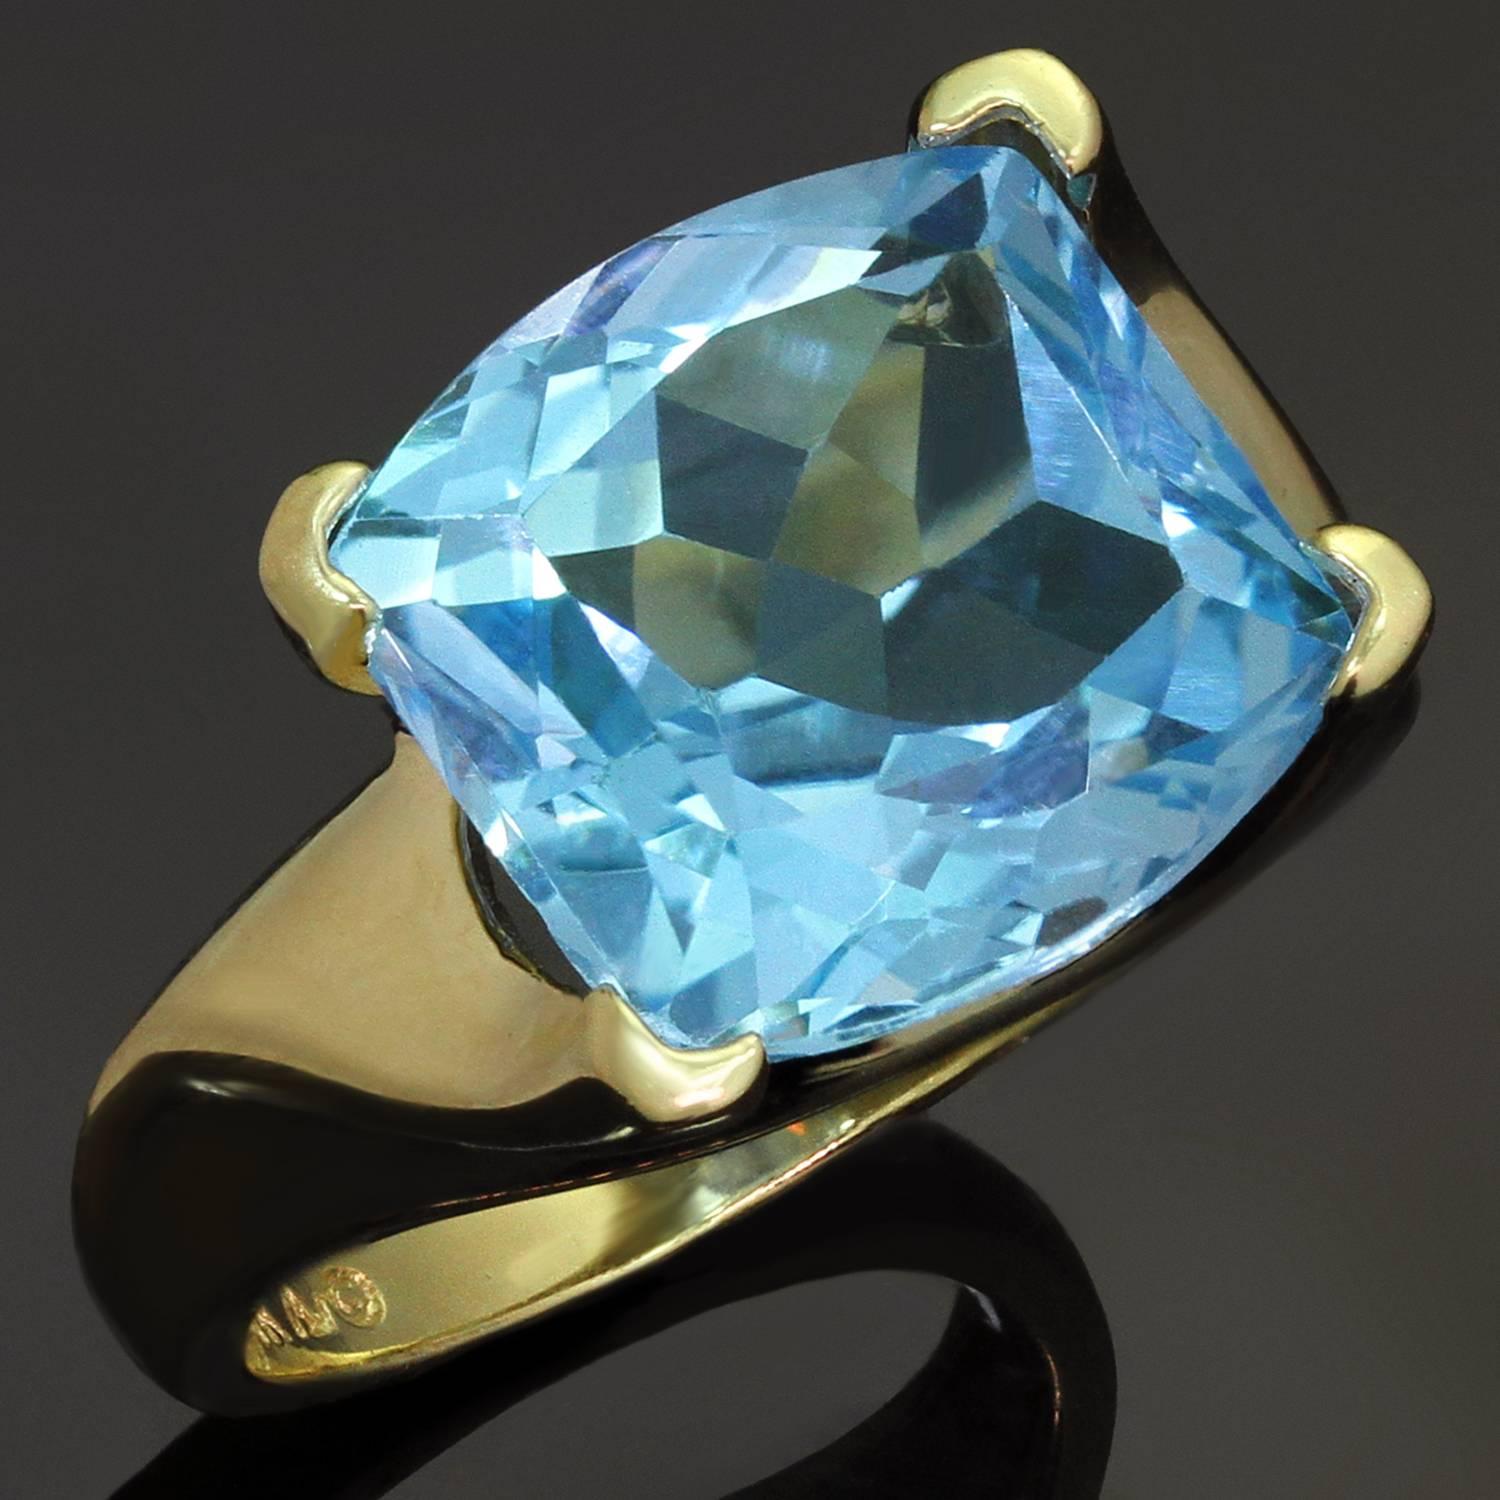 This elegant ring is crafted in 14k white gold and set with a 12.0mm x 12.0mm sparkling laser-cut blue topaz with clear intense blue color. Made in United States circa 2000s. Measurements: 0.55